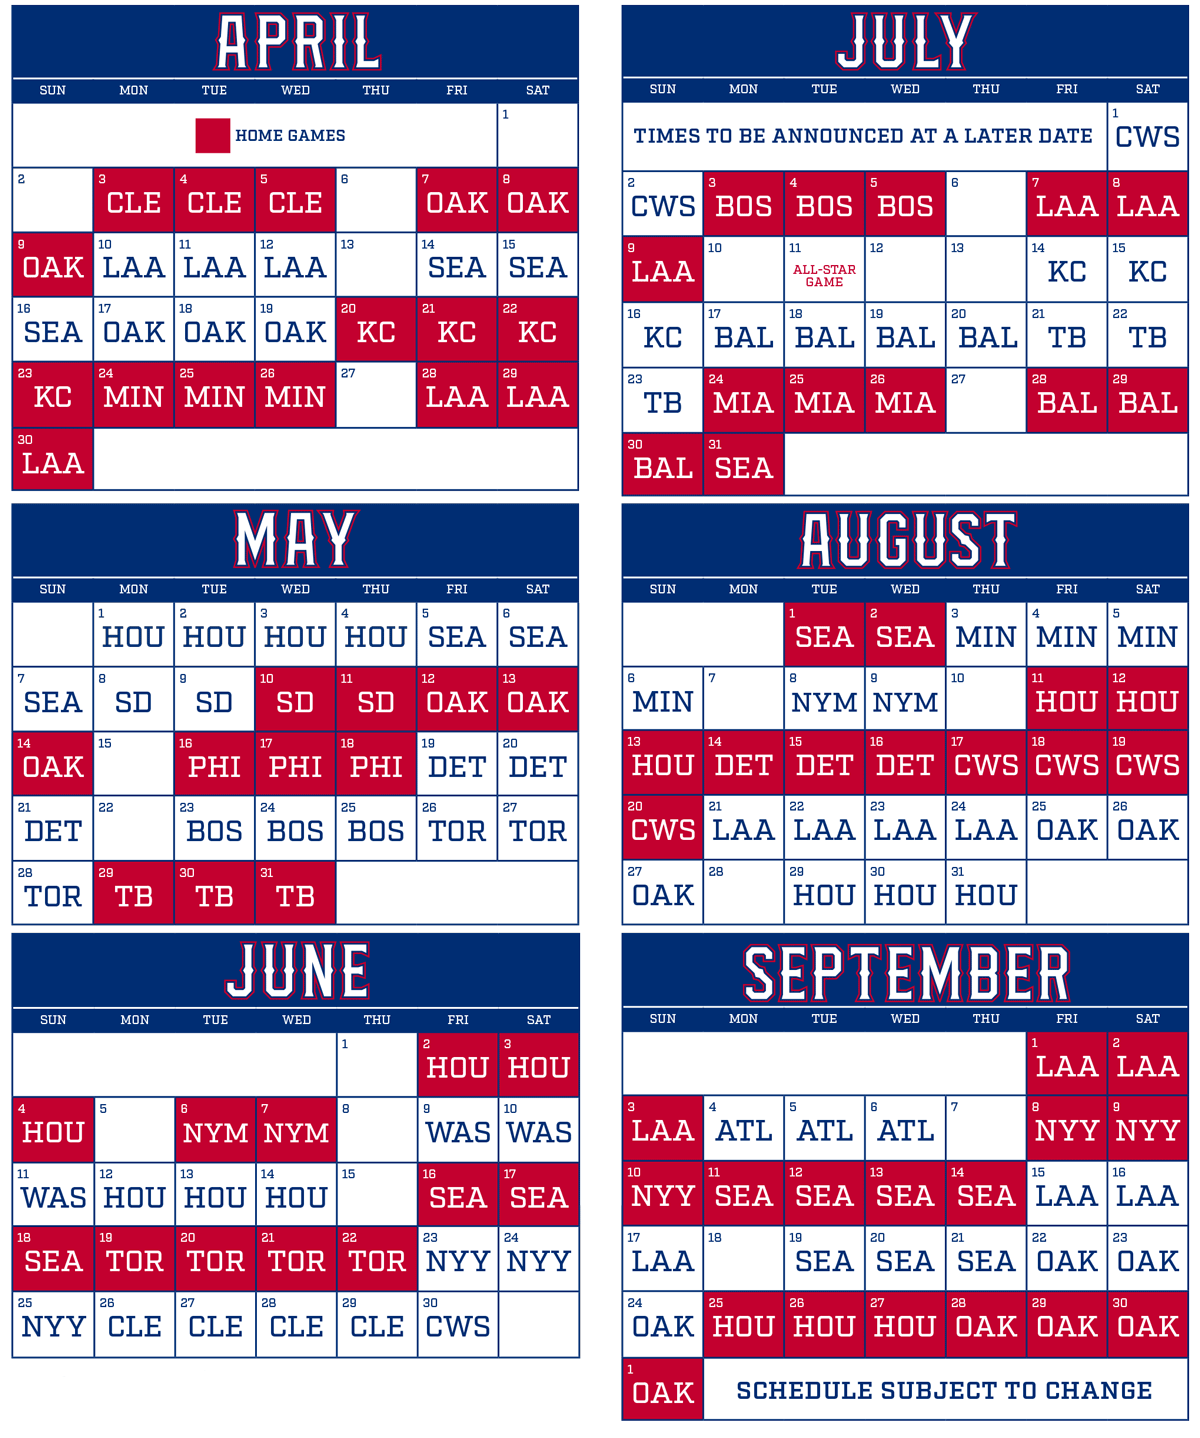 Rangers 2017 schedule released Texas to open next season at home, play